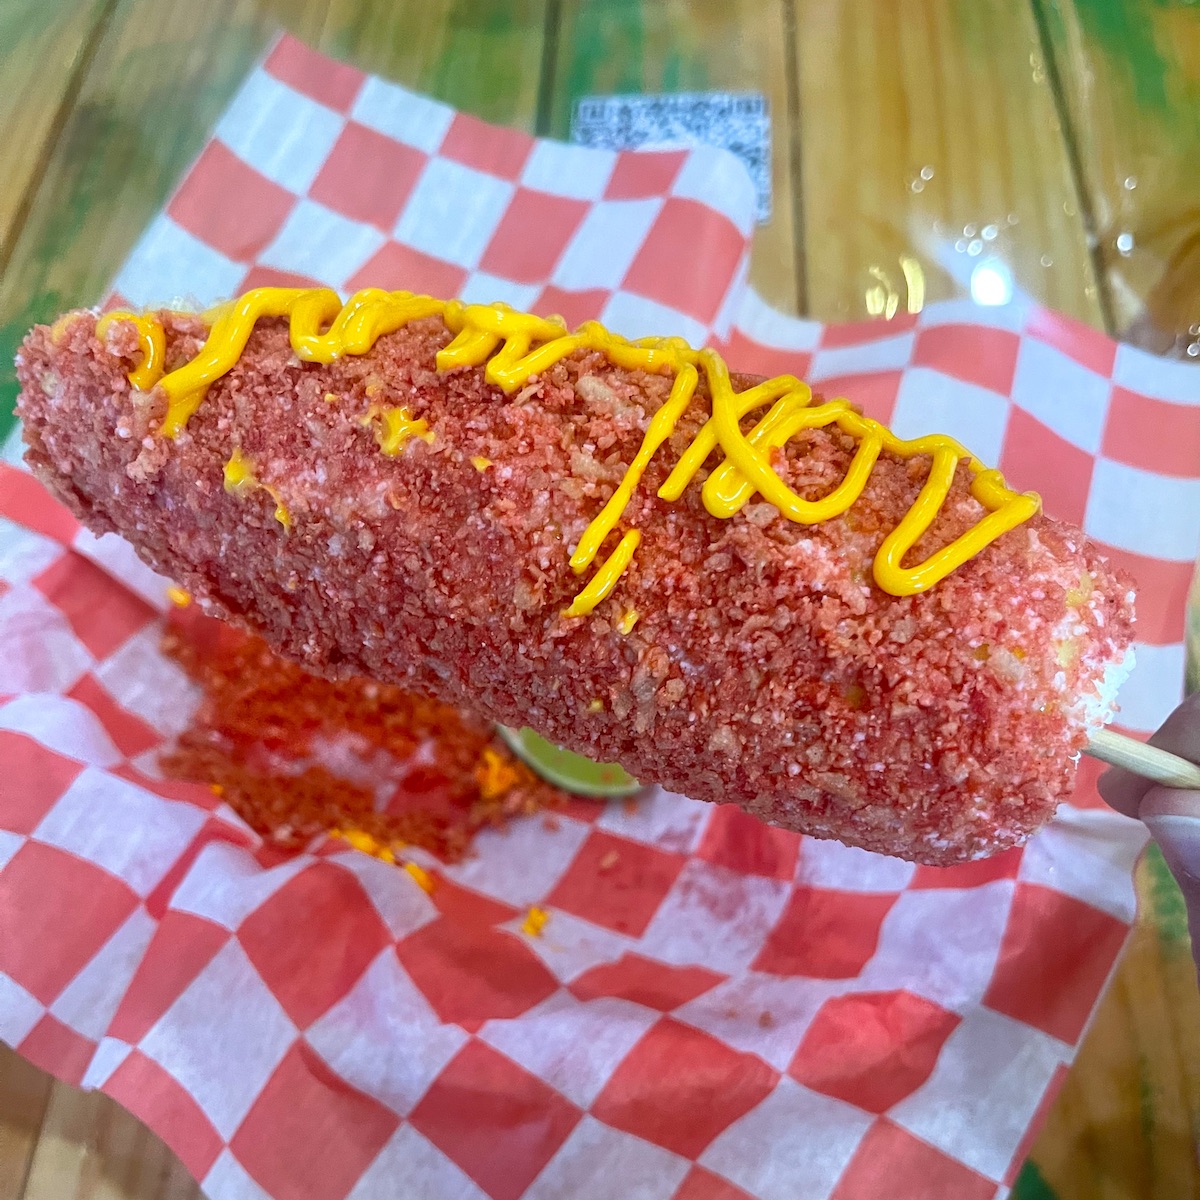 Elote covered in Takis from No Manches Taqueria in West Miami, Florida